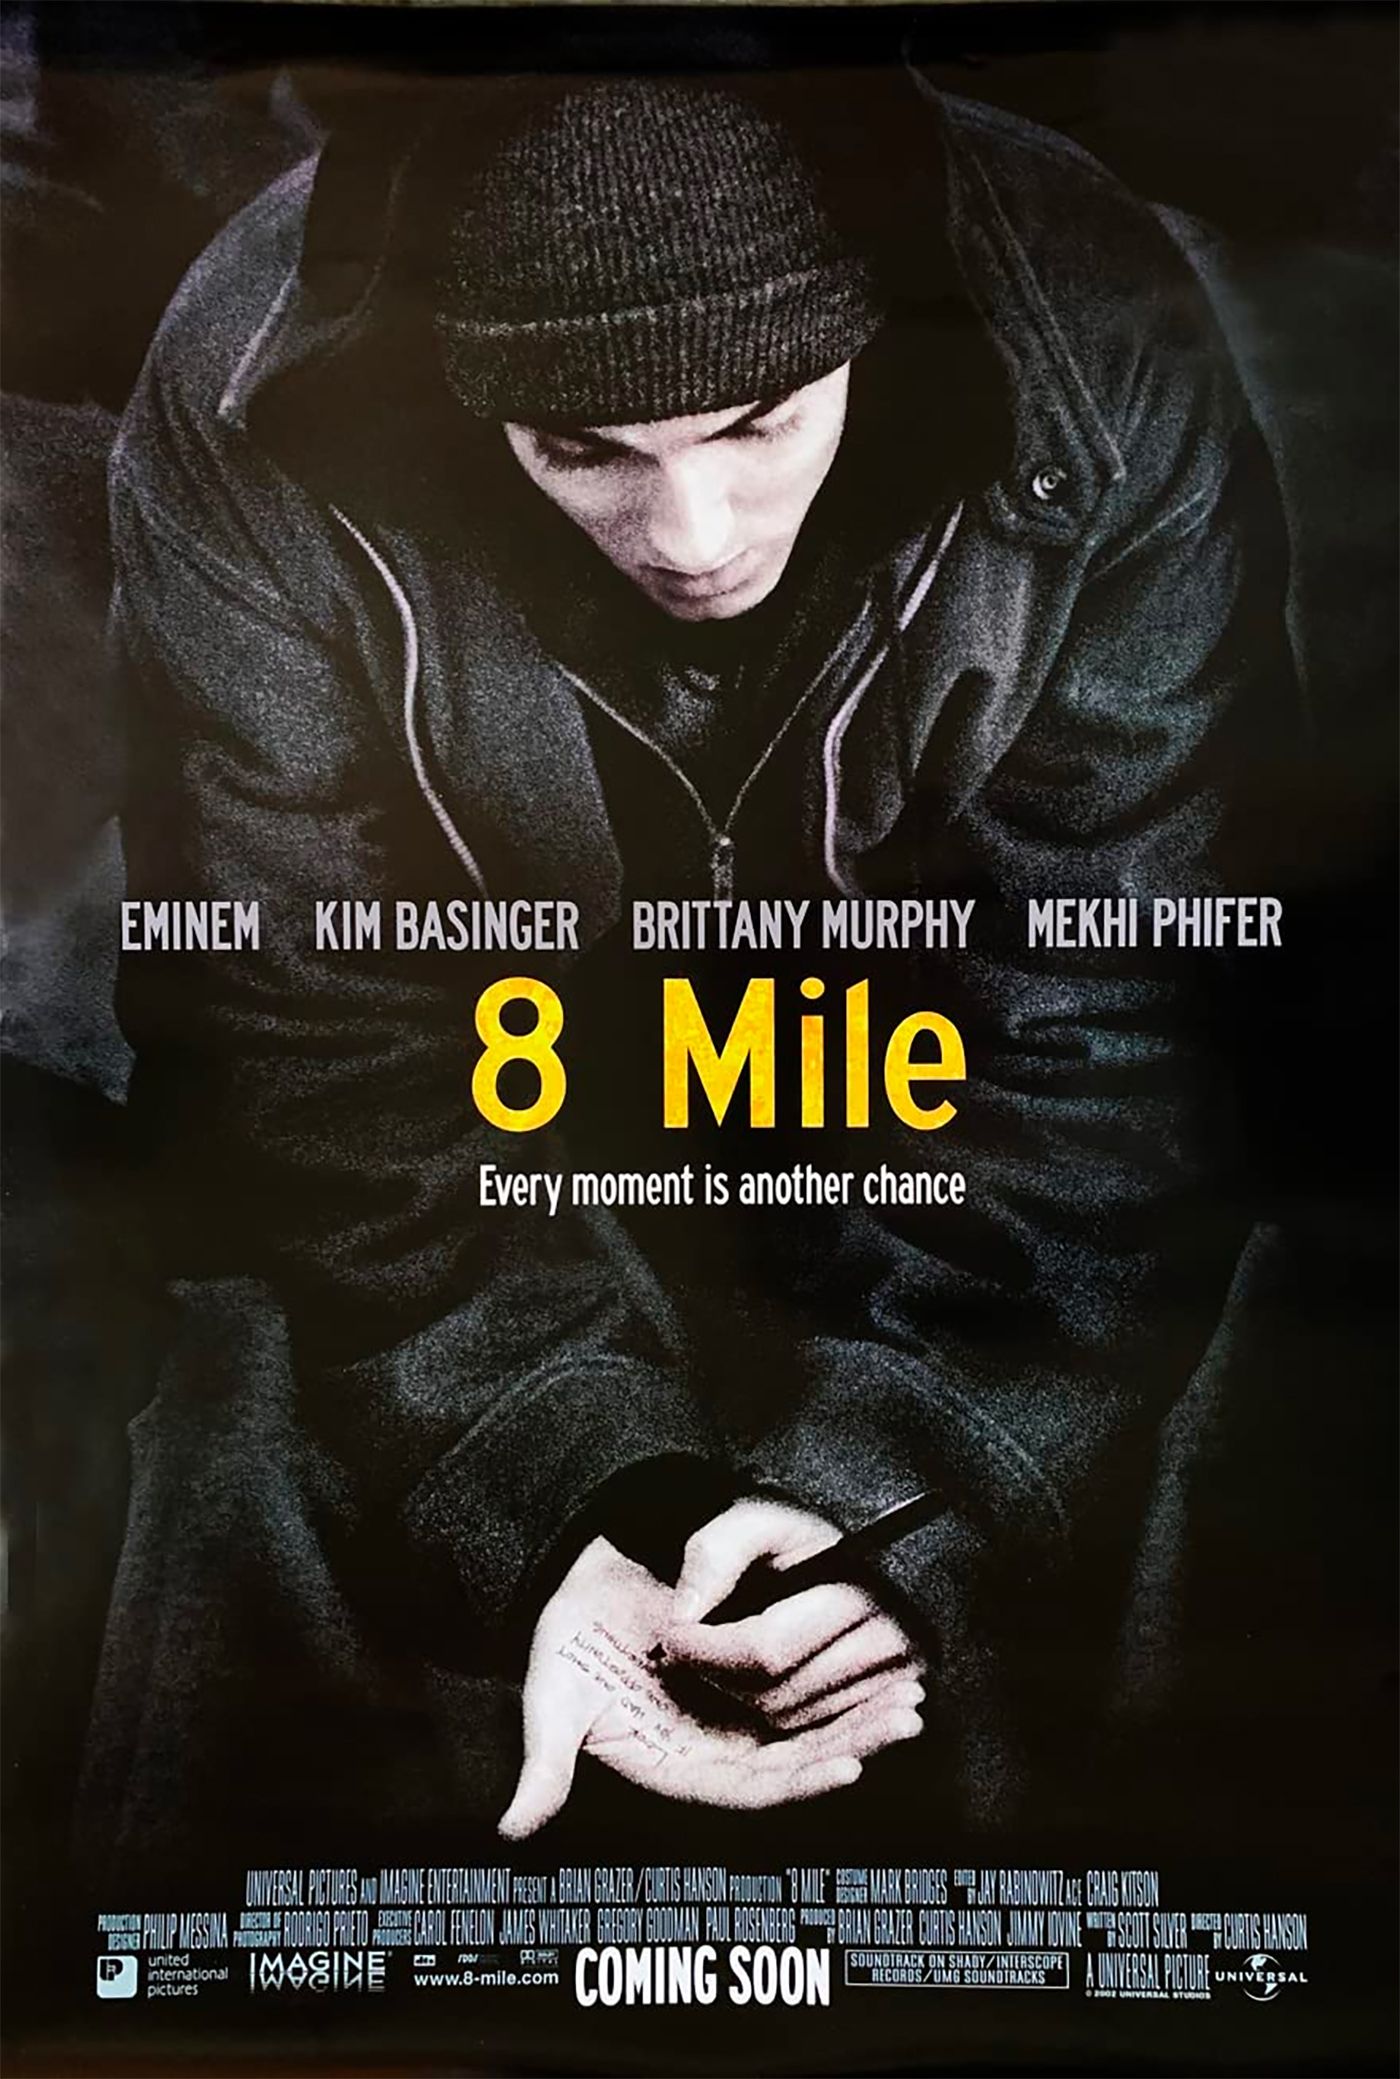 Eminem writing on his hand in the poster for 8 Mile